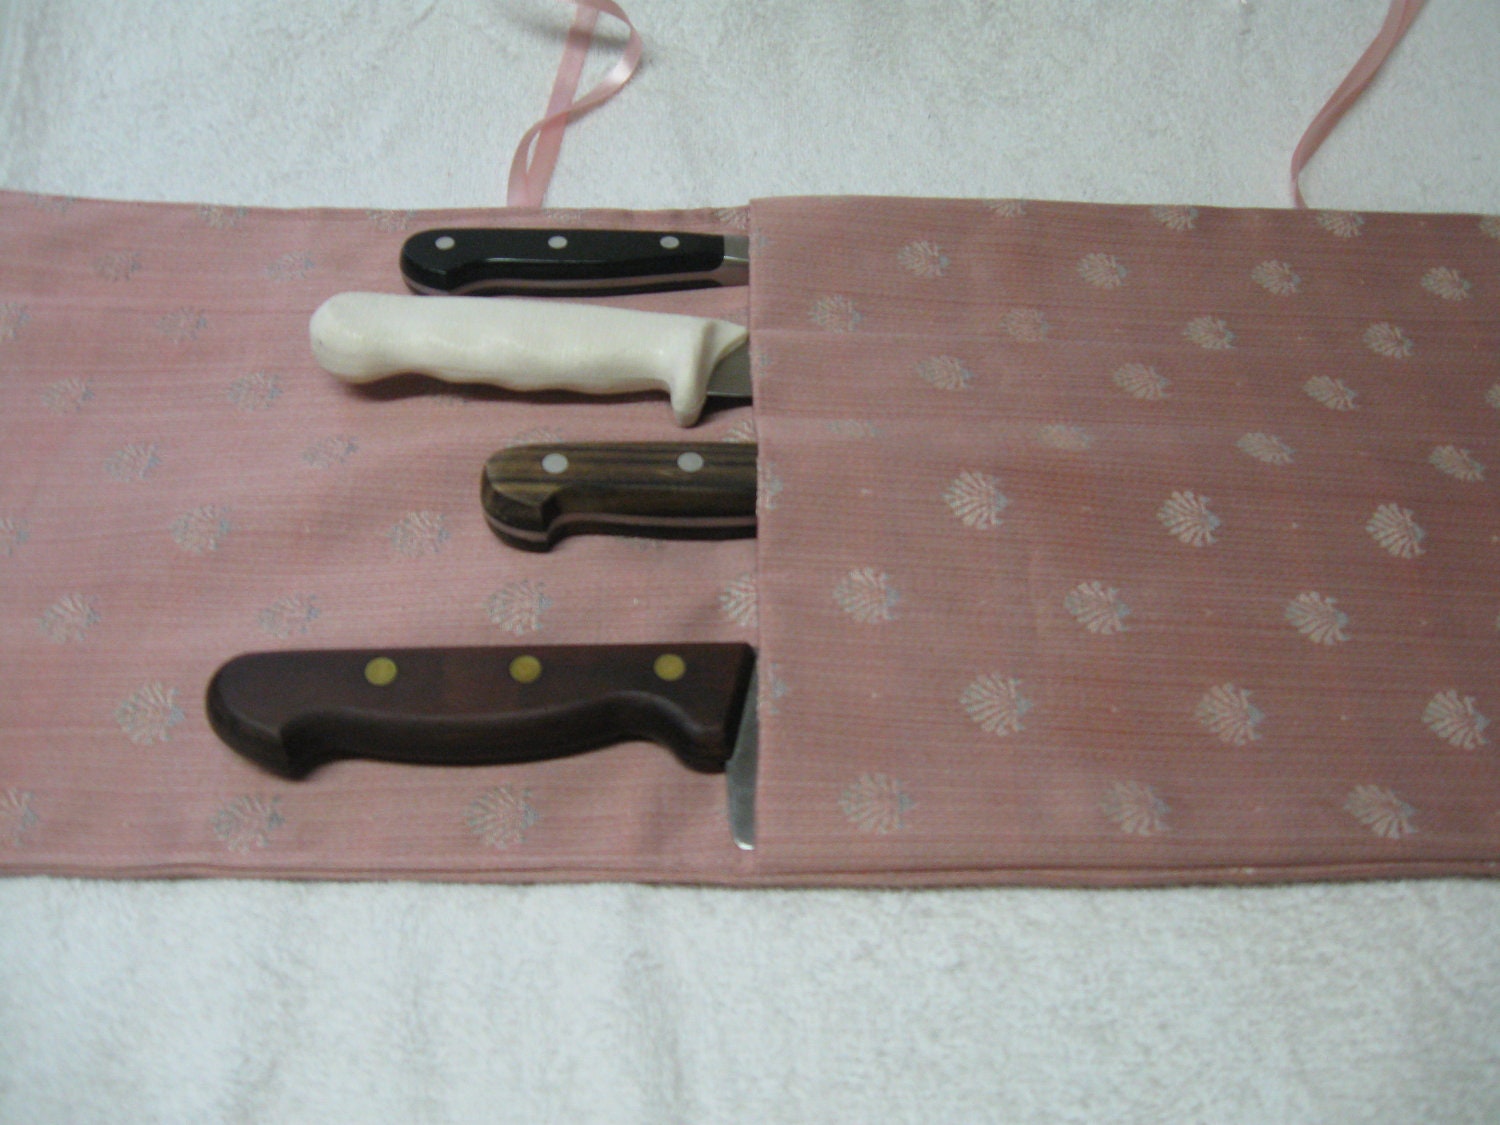 Chefs Knife Organizer Carrier Knife Holder Made of Heavy Weight Fabric with Four Pockets